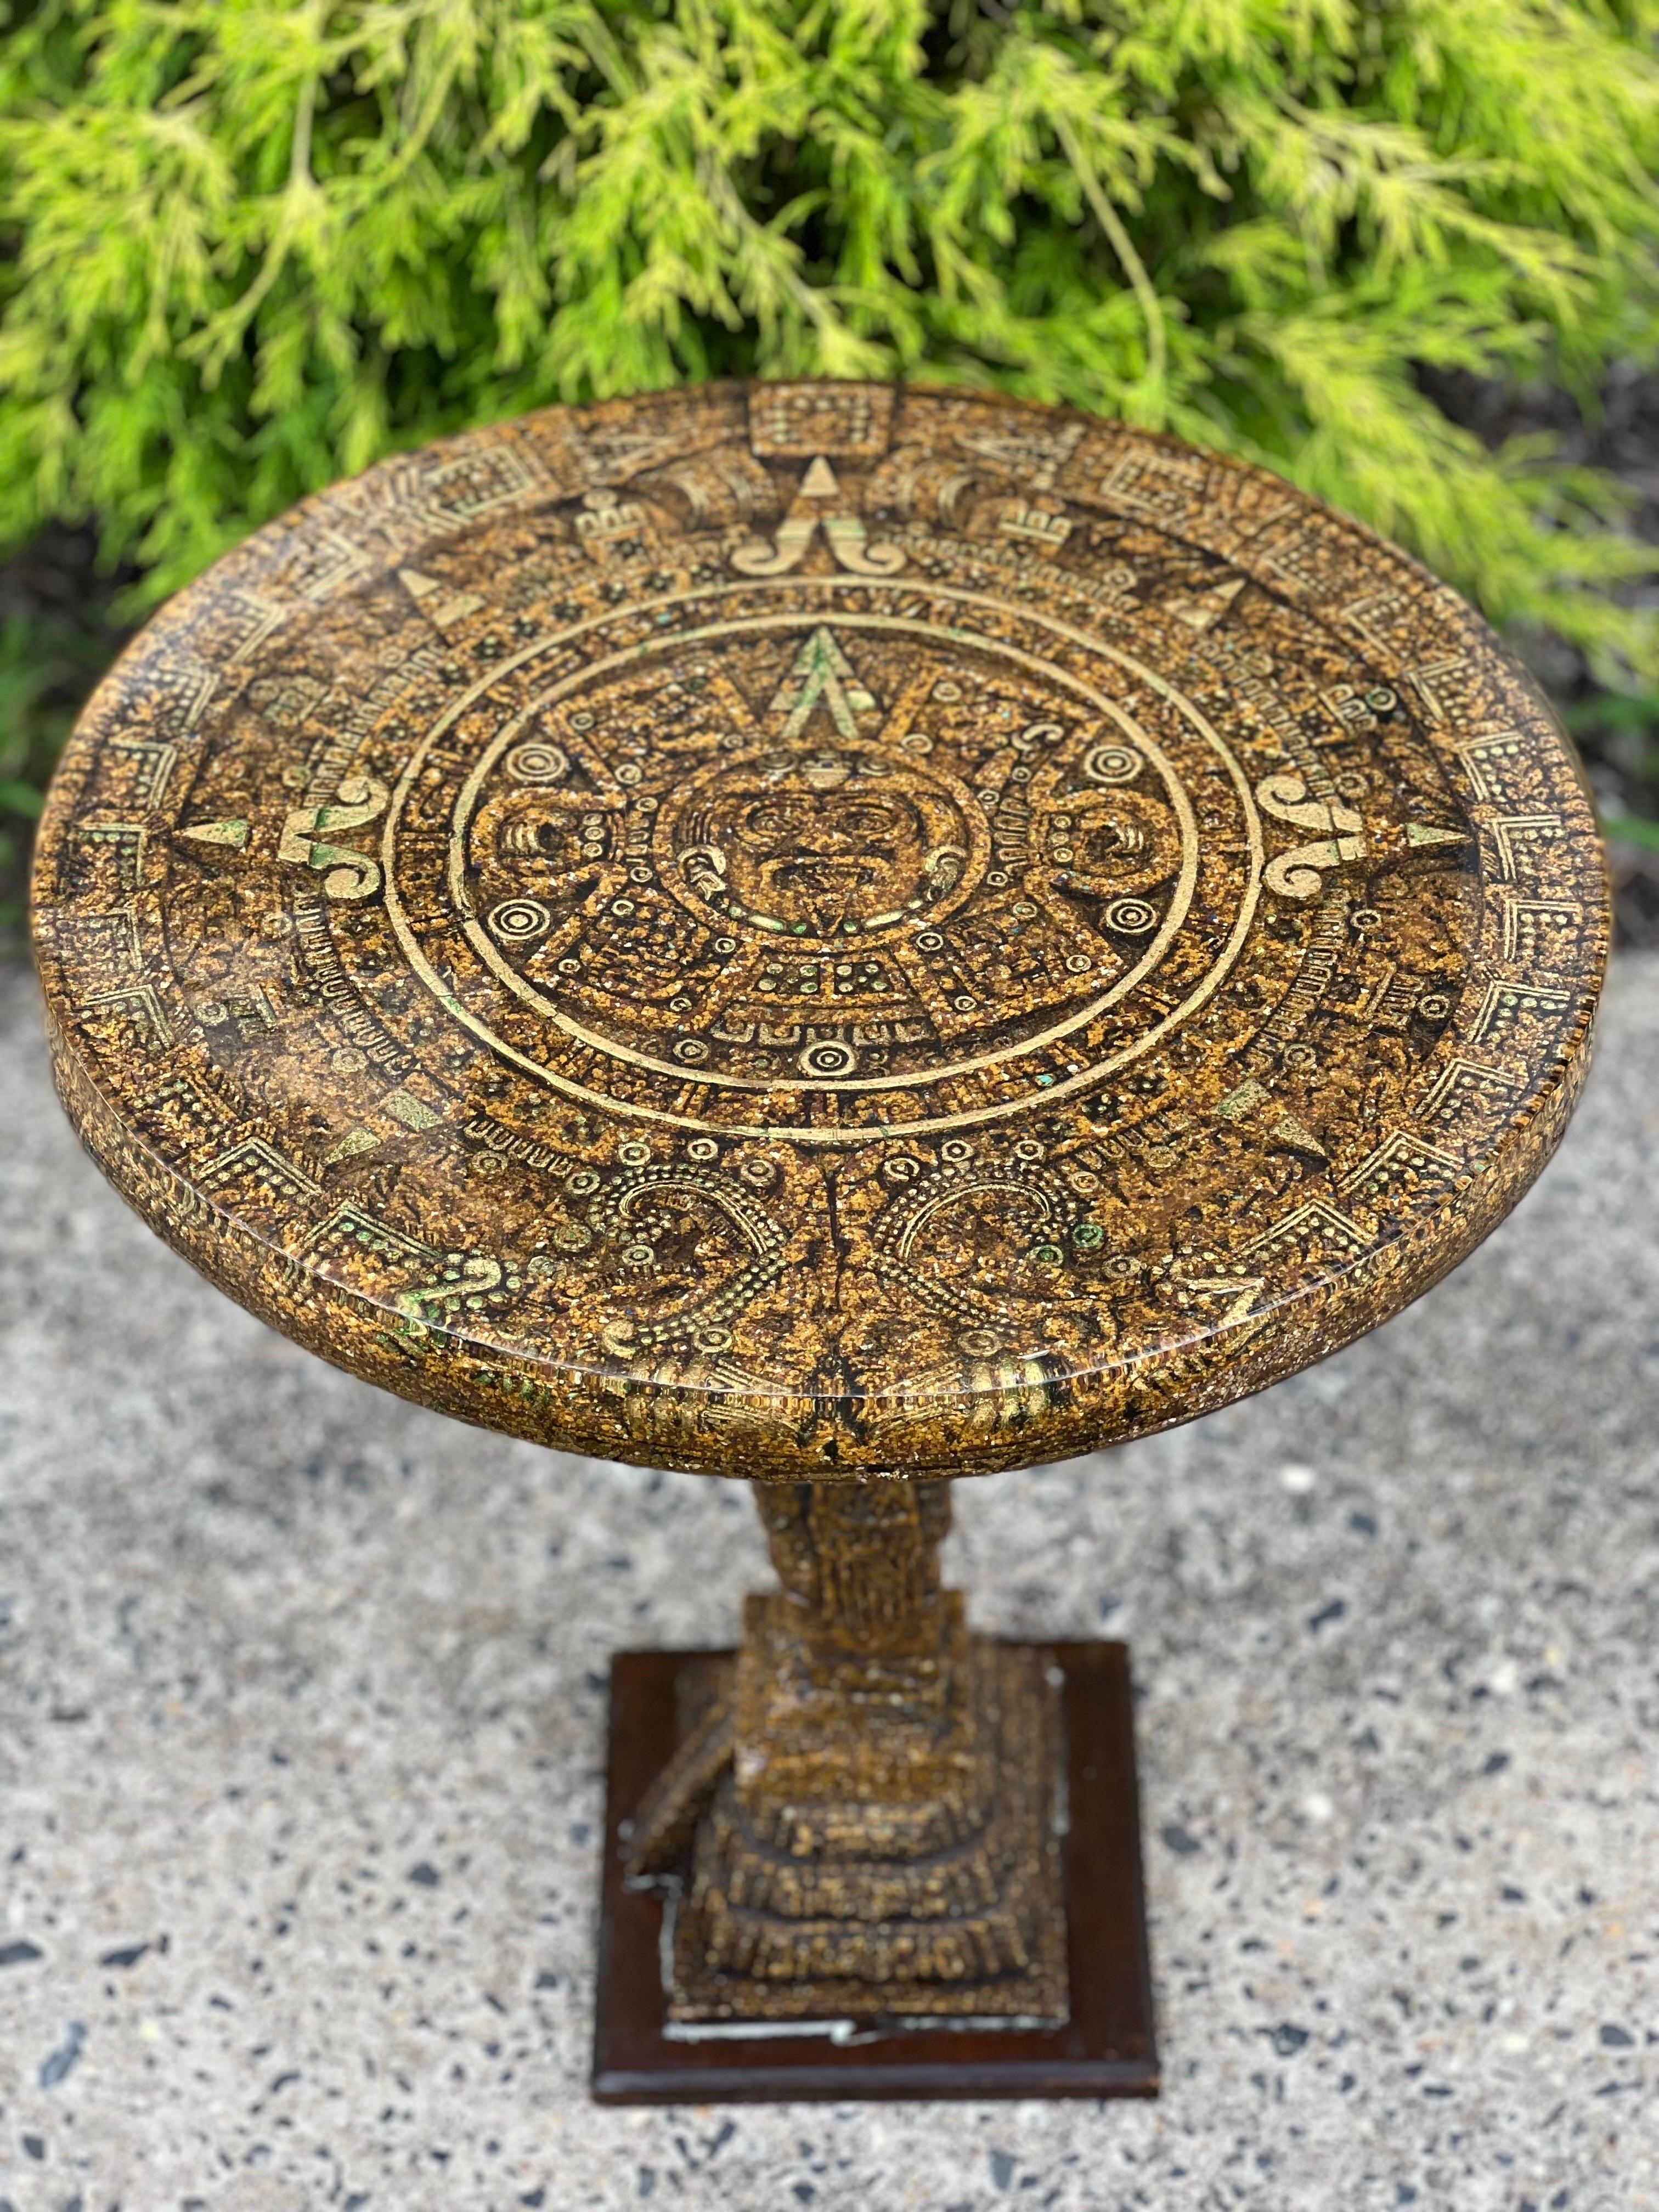 Vintage Aztec Sun Calendar Carved Stone Pedestal Table in Lucite, Mexico 2